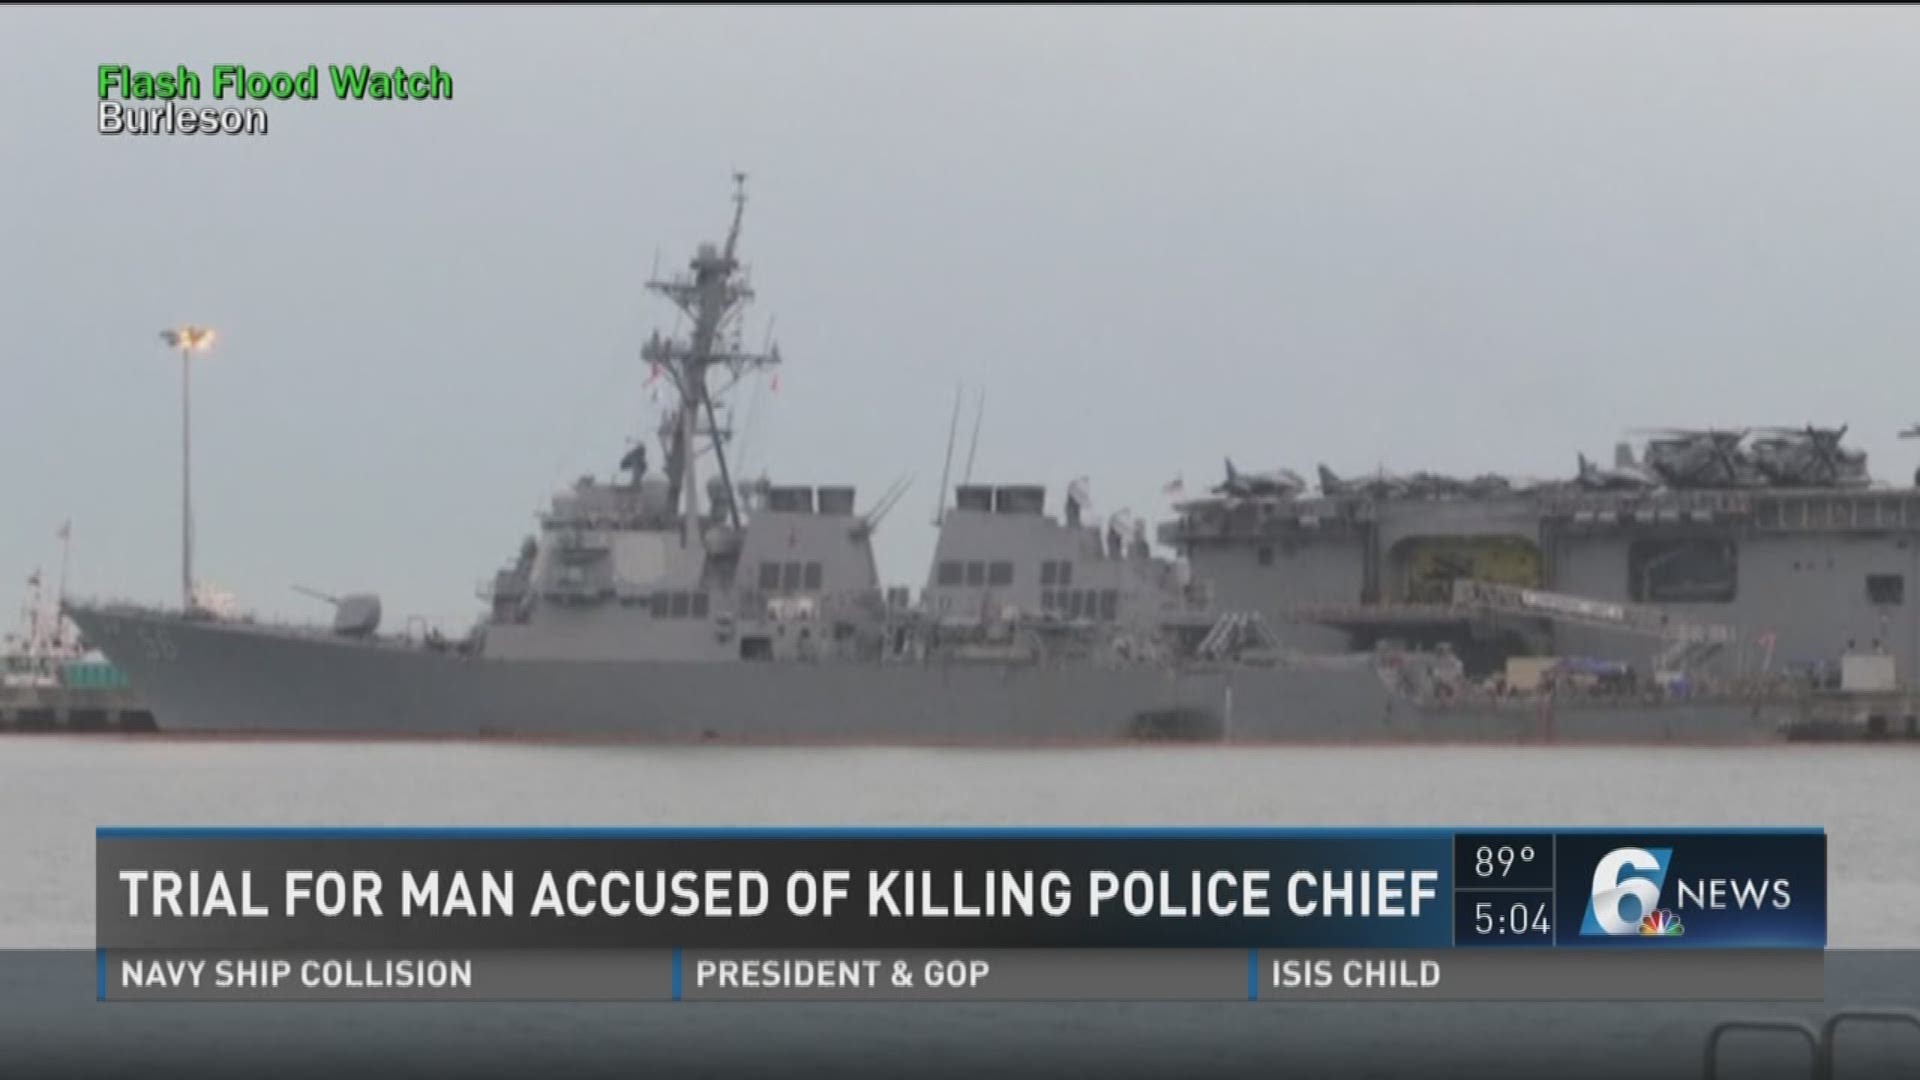 The U.S. navy called off the search at sea for sailors missing after a collision between the USS John S McCain and an oil tanker, and confirmed the identity of one body.